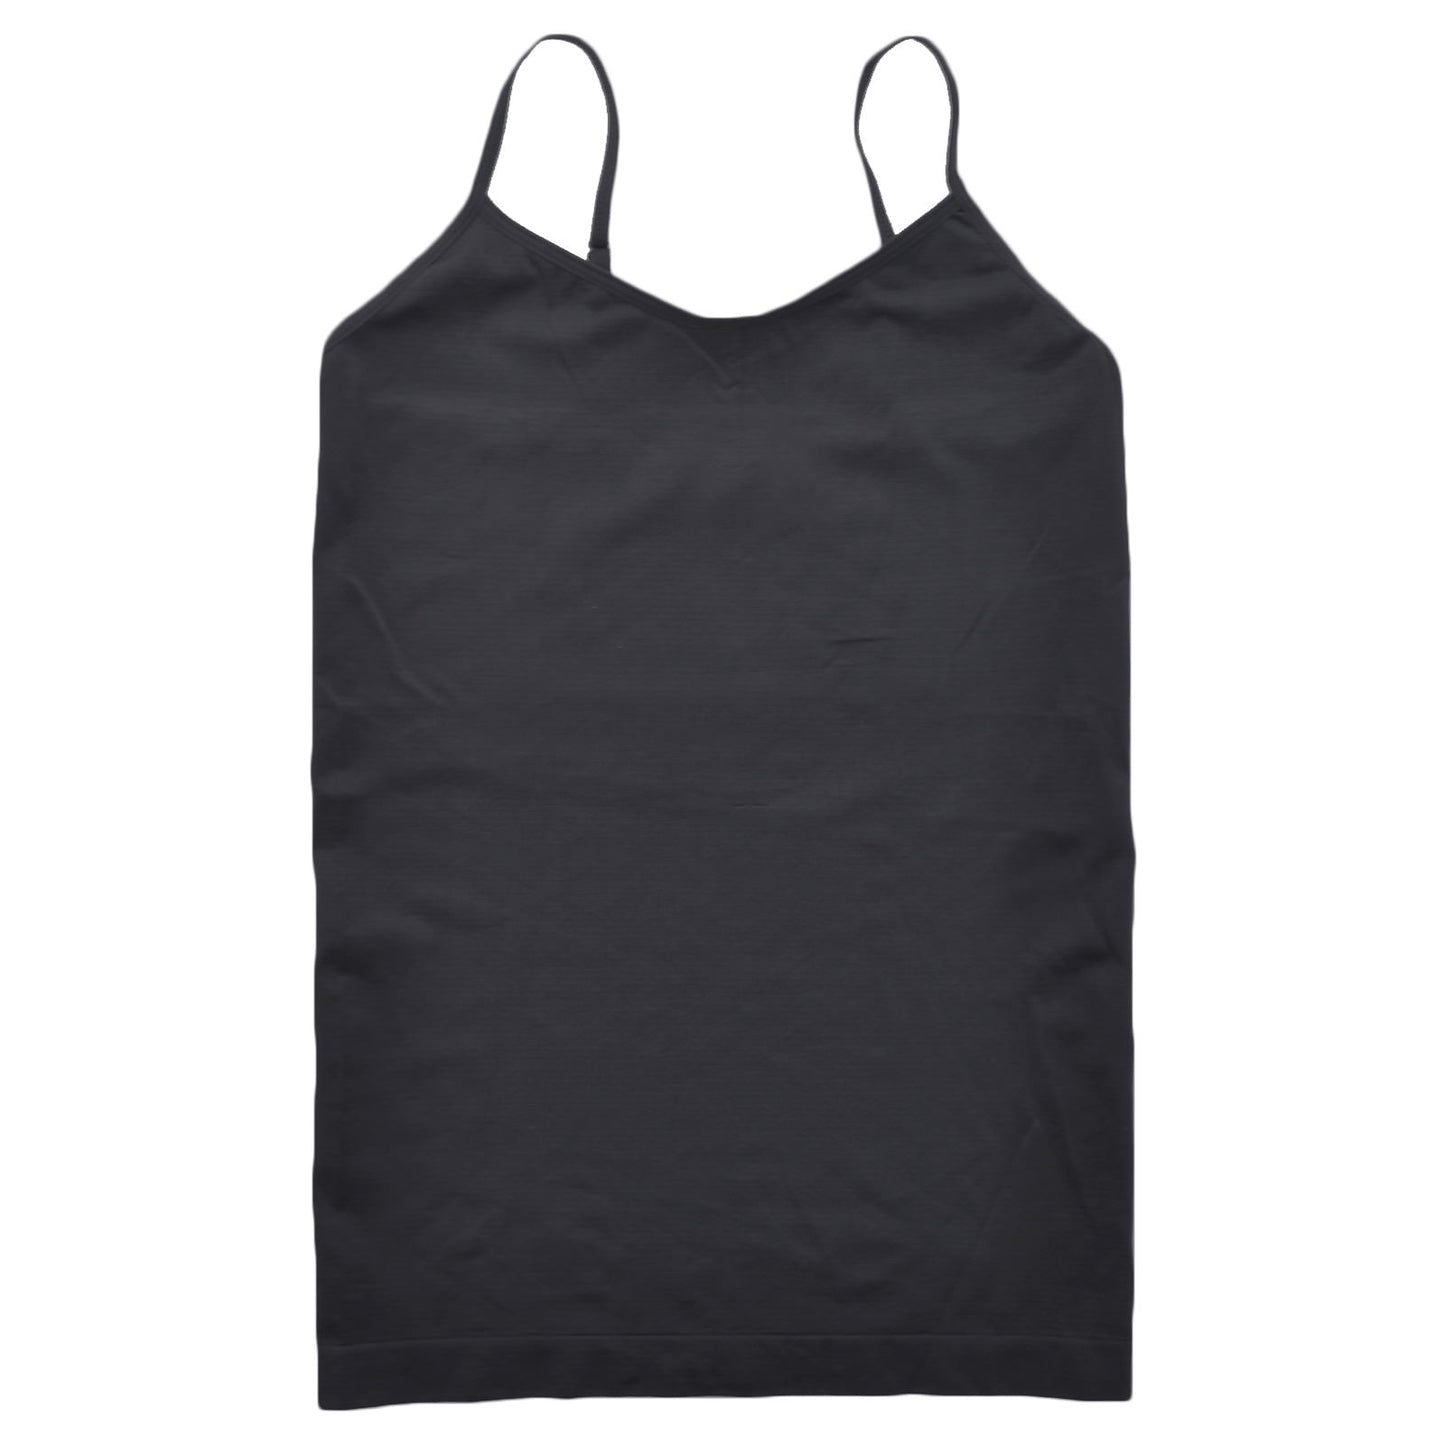 Angelina Seamless Tank Top with Adjustable Spaghetti Straps